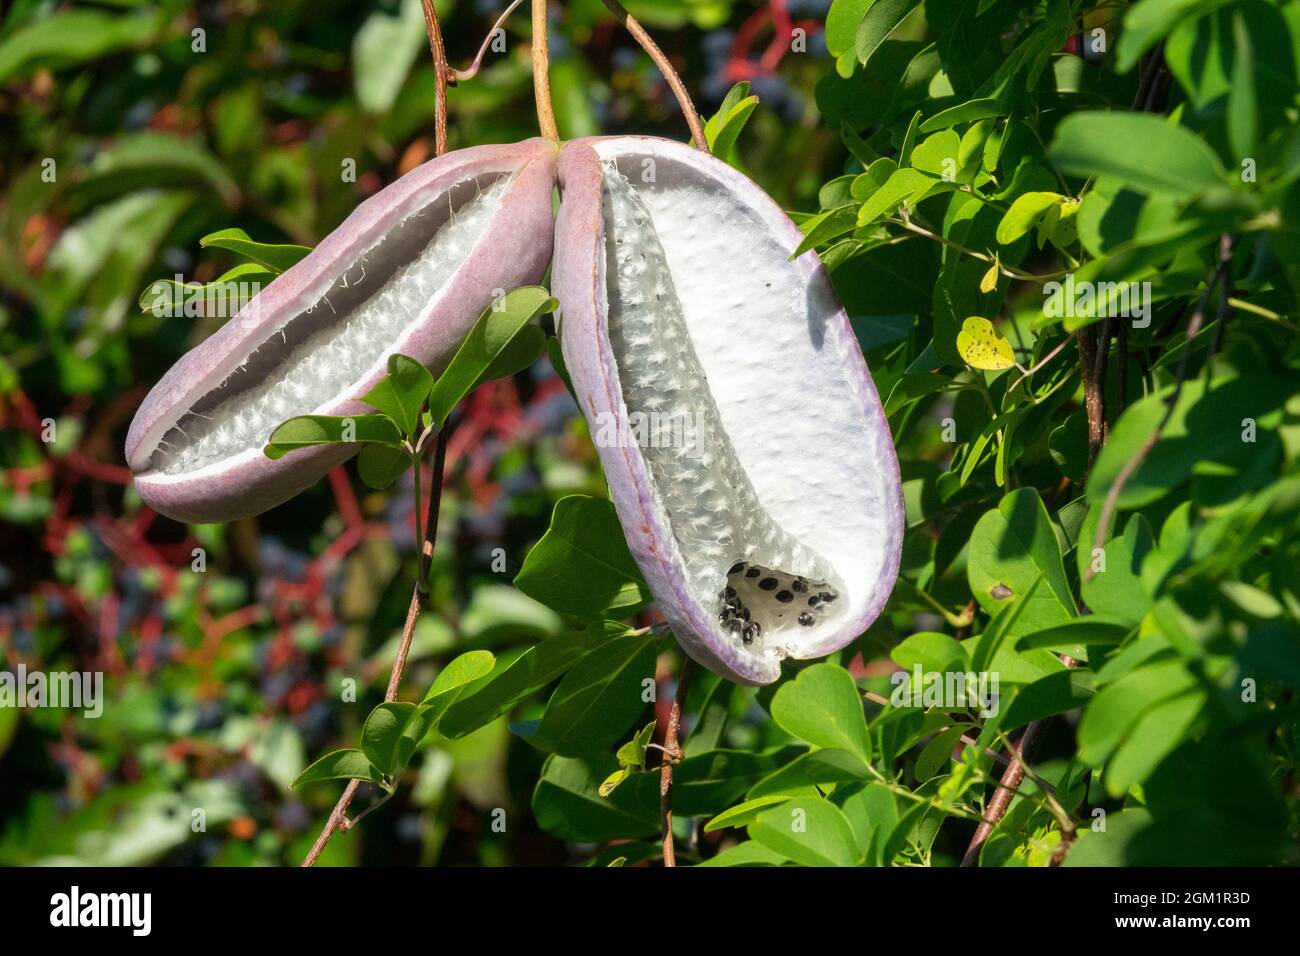 Garden climber seeds hanging popping pods Akebia quinata Stock Photo